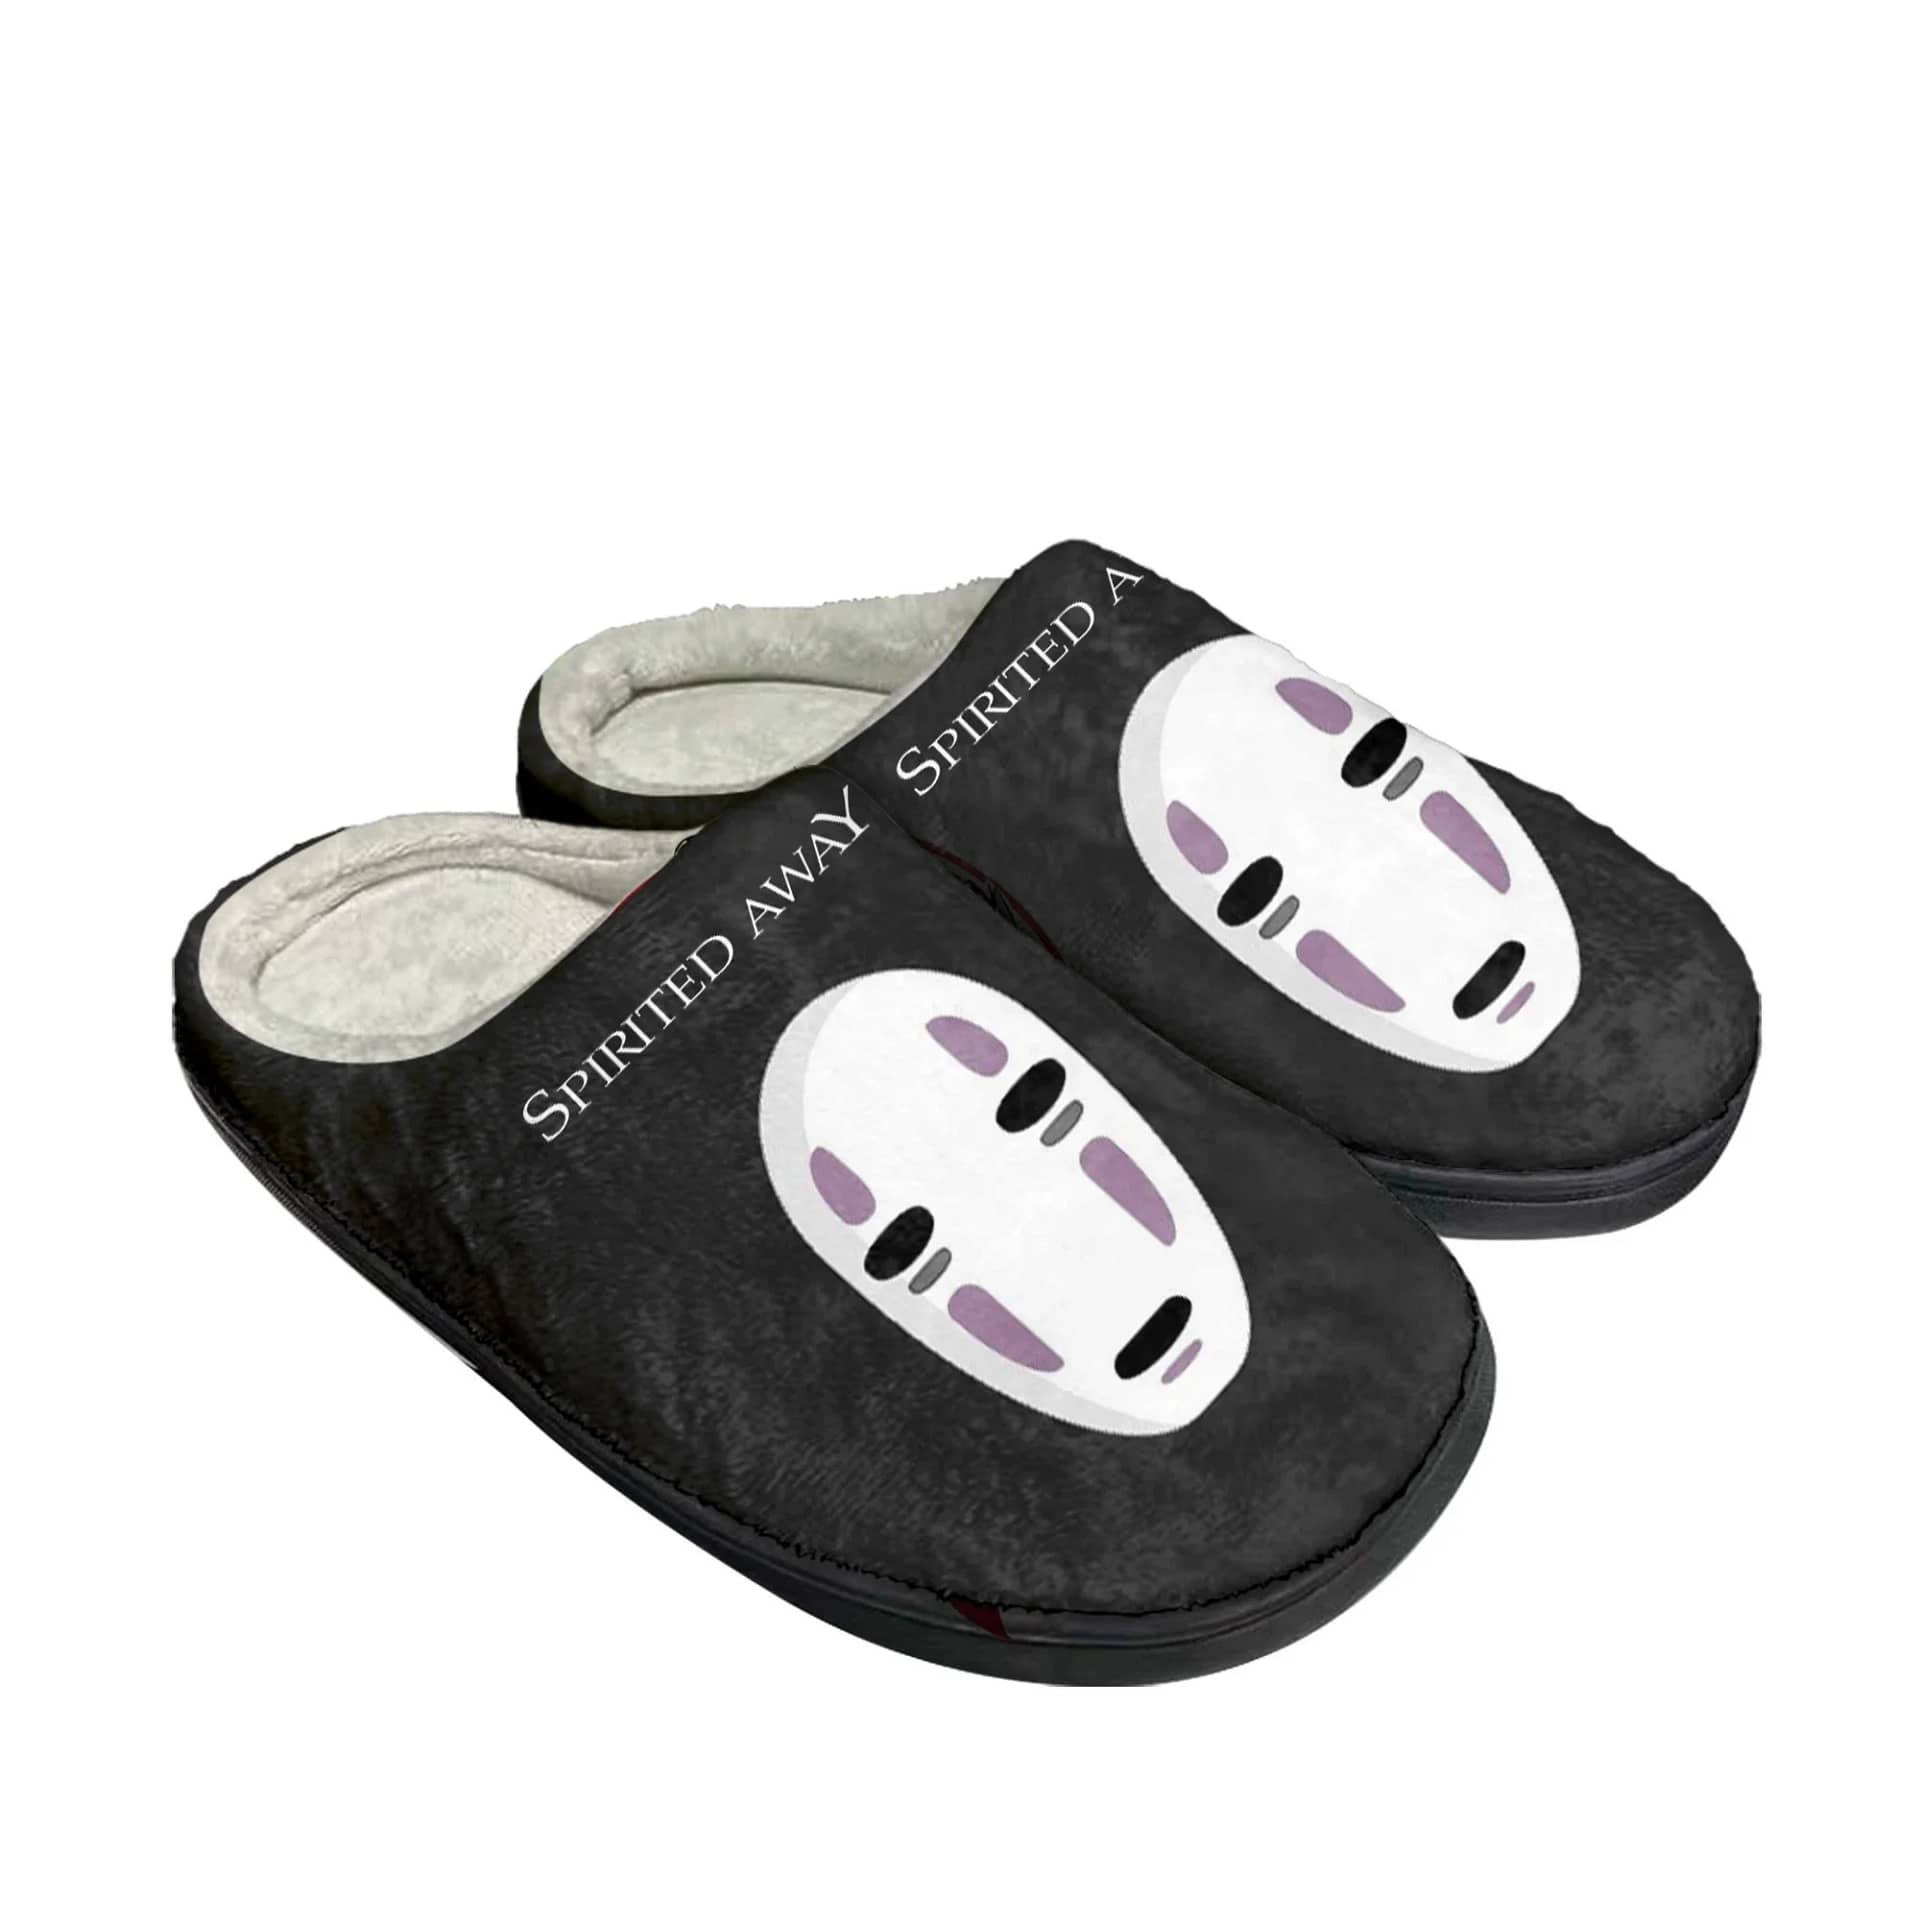 Spirited Away Shoes Slippers